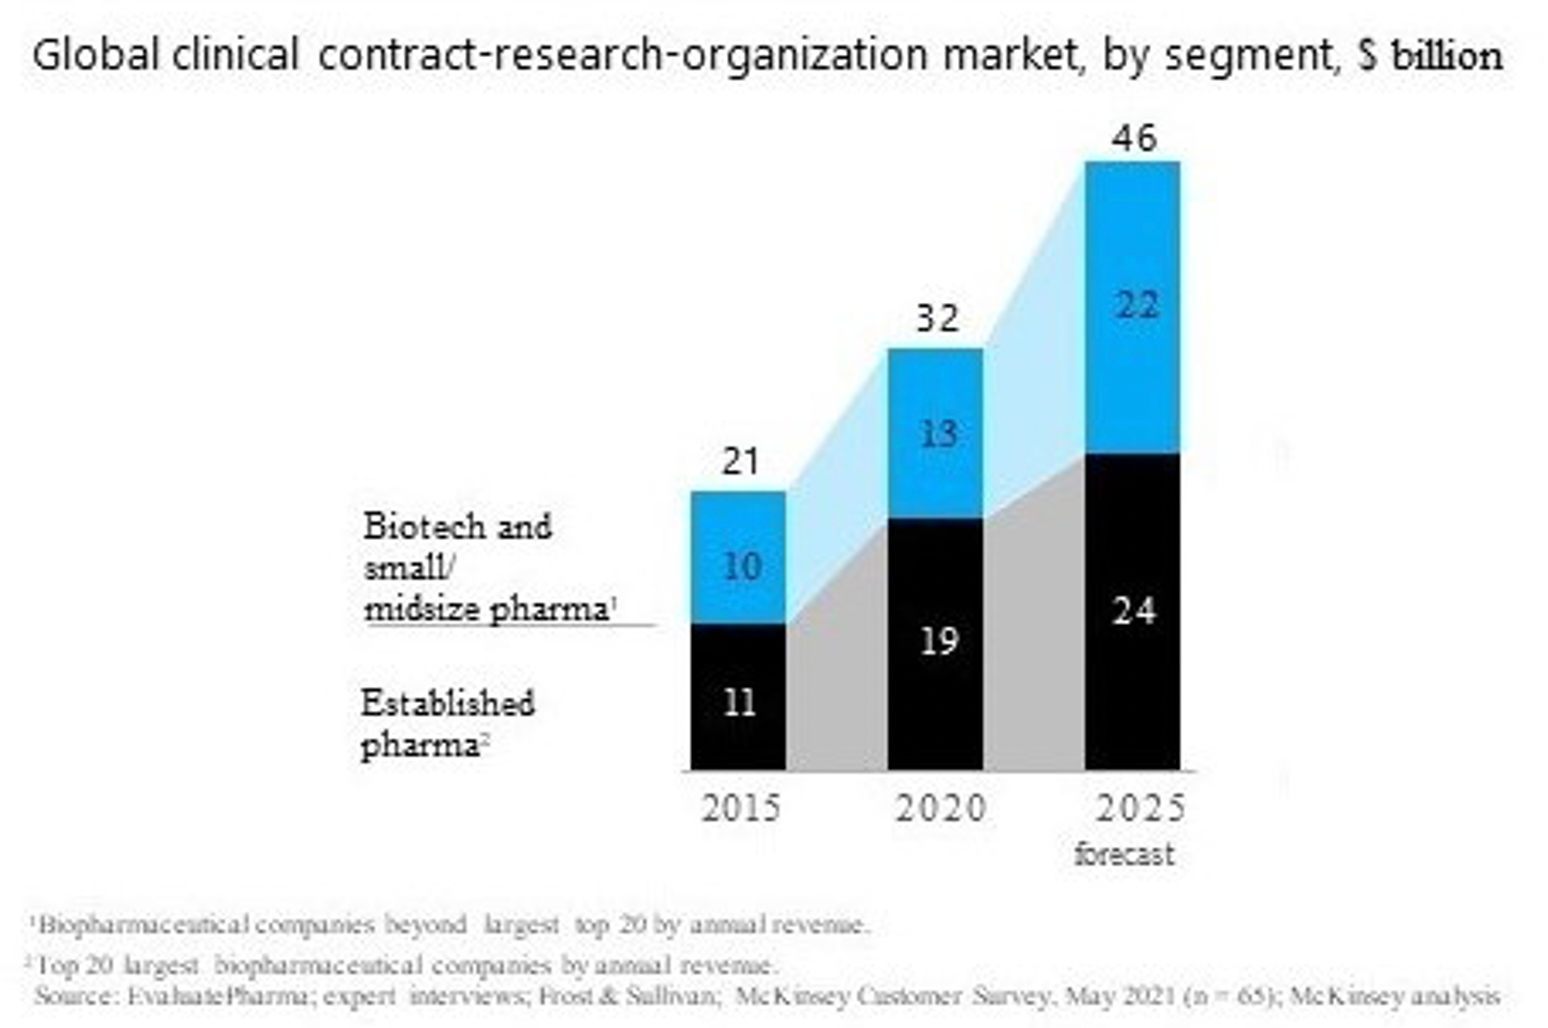 Figure 2. McKinsey Report, Survey Results 2021

Source: Bleys, J.; Fleming, E.; Mirman, H.; The, L. CROs and Biotech Companies: Fine-Tuning the Partnership. McKinsey & Company. June 2022. https://www.mckinsey.com/industries/life-sciences/our-insights/cros-and-biotech-companies-fine-tuning-the-partnership#/.